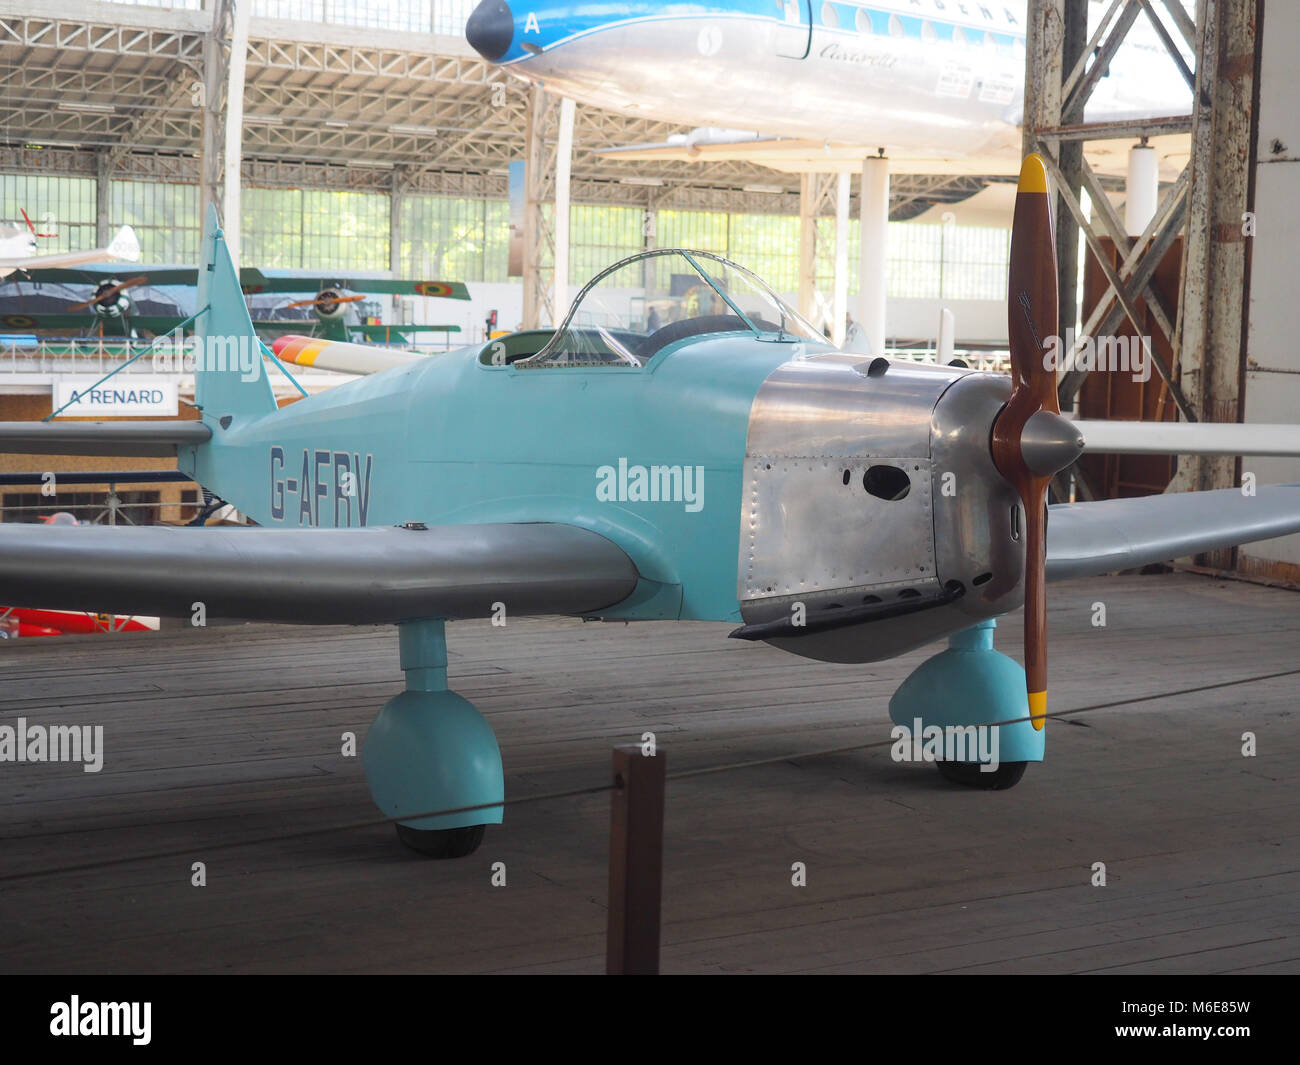 BRUSSELS, BELGIUM-OCT. 1: A Tipsy Trainer (1937) antique training airplane is seen on display at the Royal Museum of The Armed Forces and Military His Stock Photo